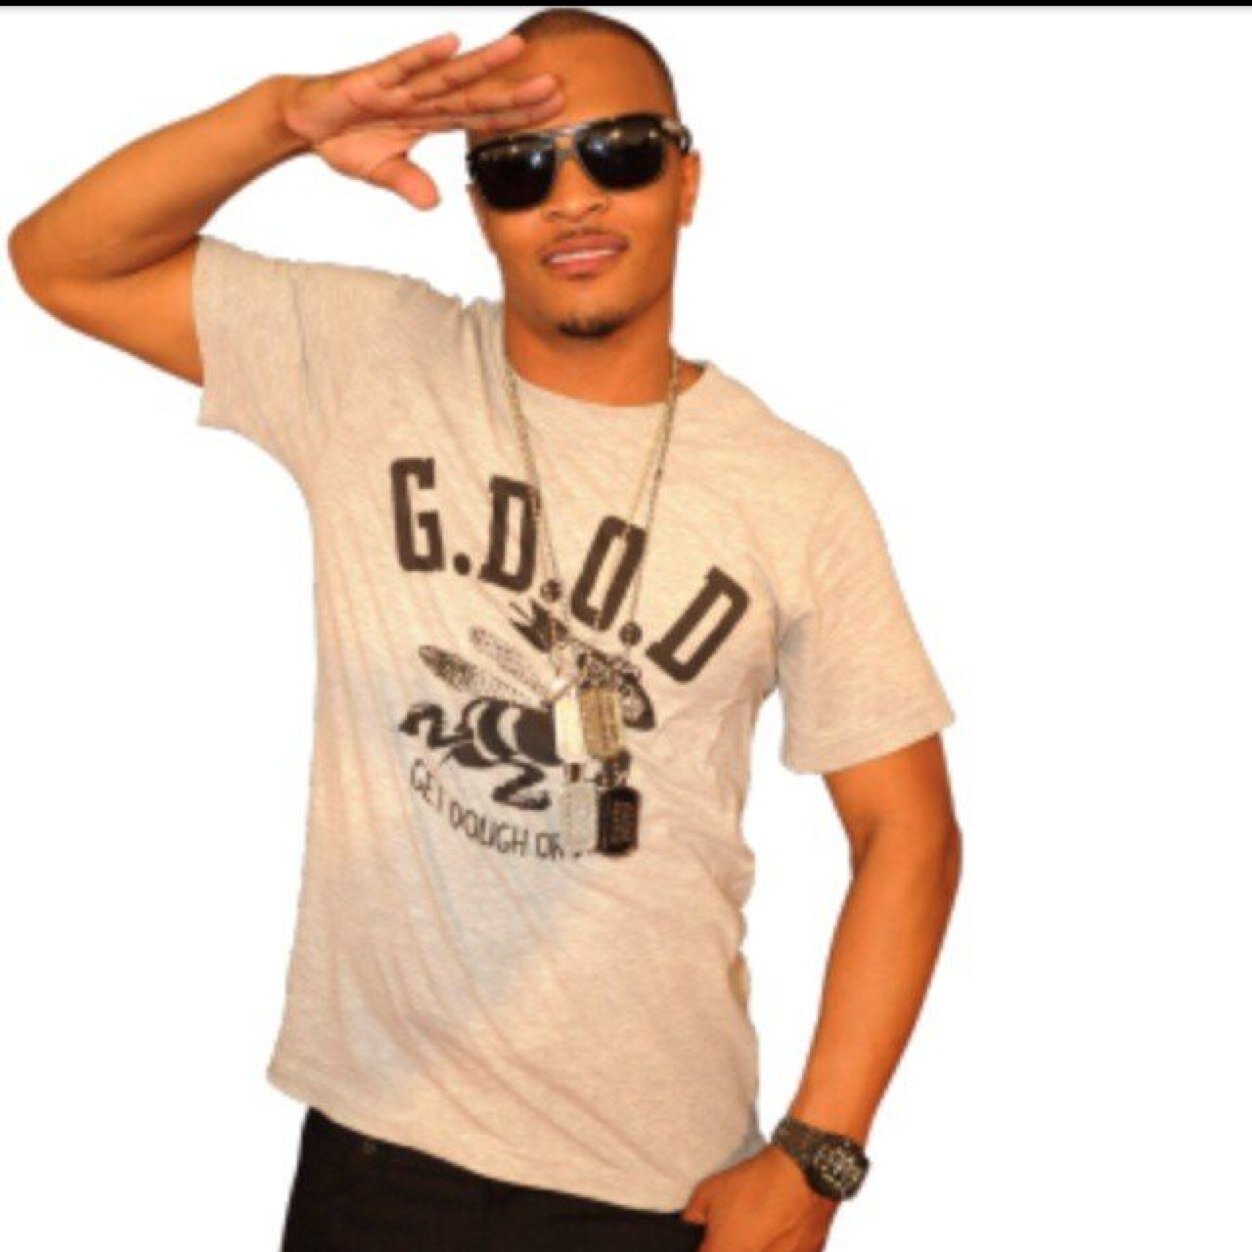 T.I. Quotes